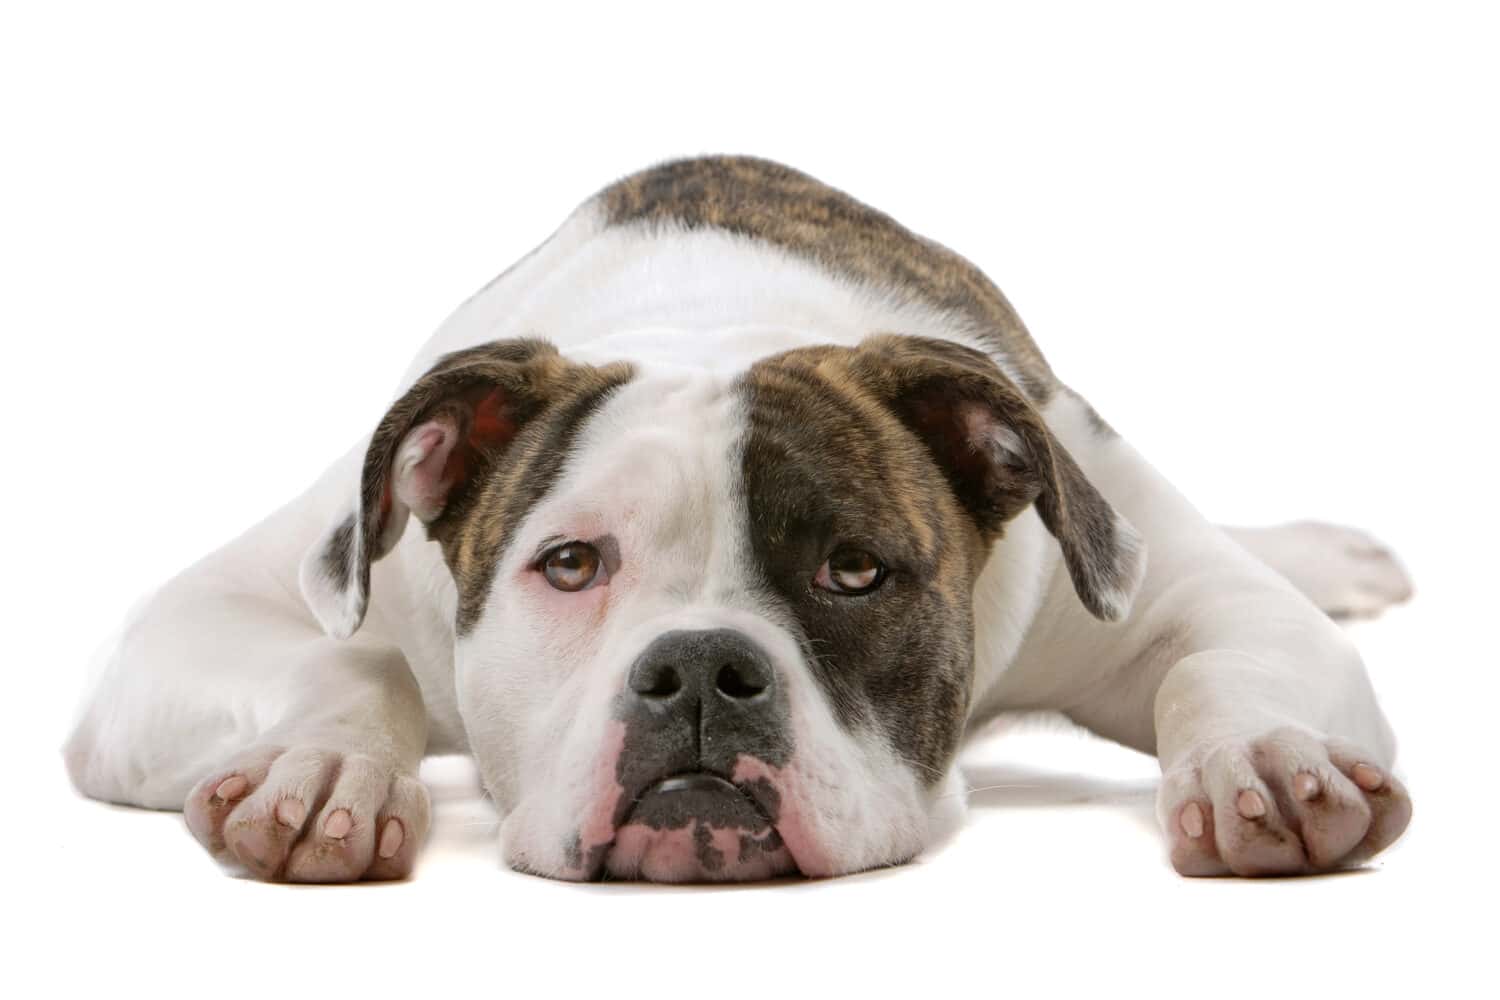 American bulldog puppy ( 5 months old) isolated on a white background